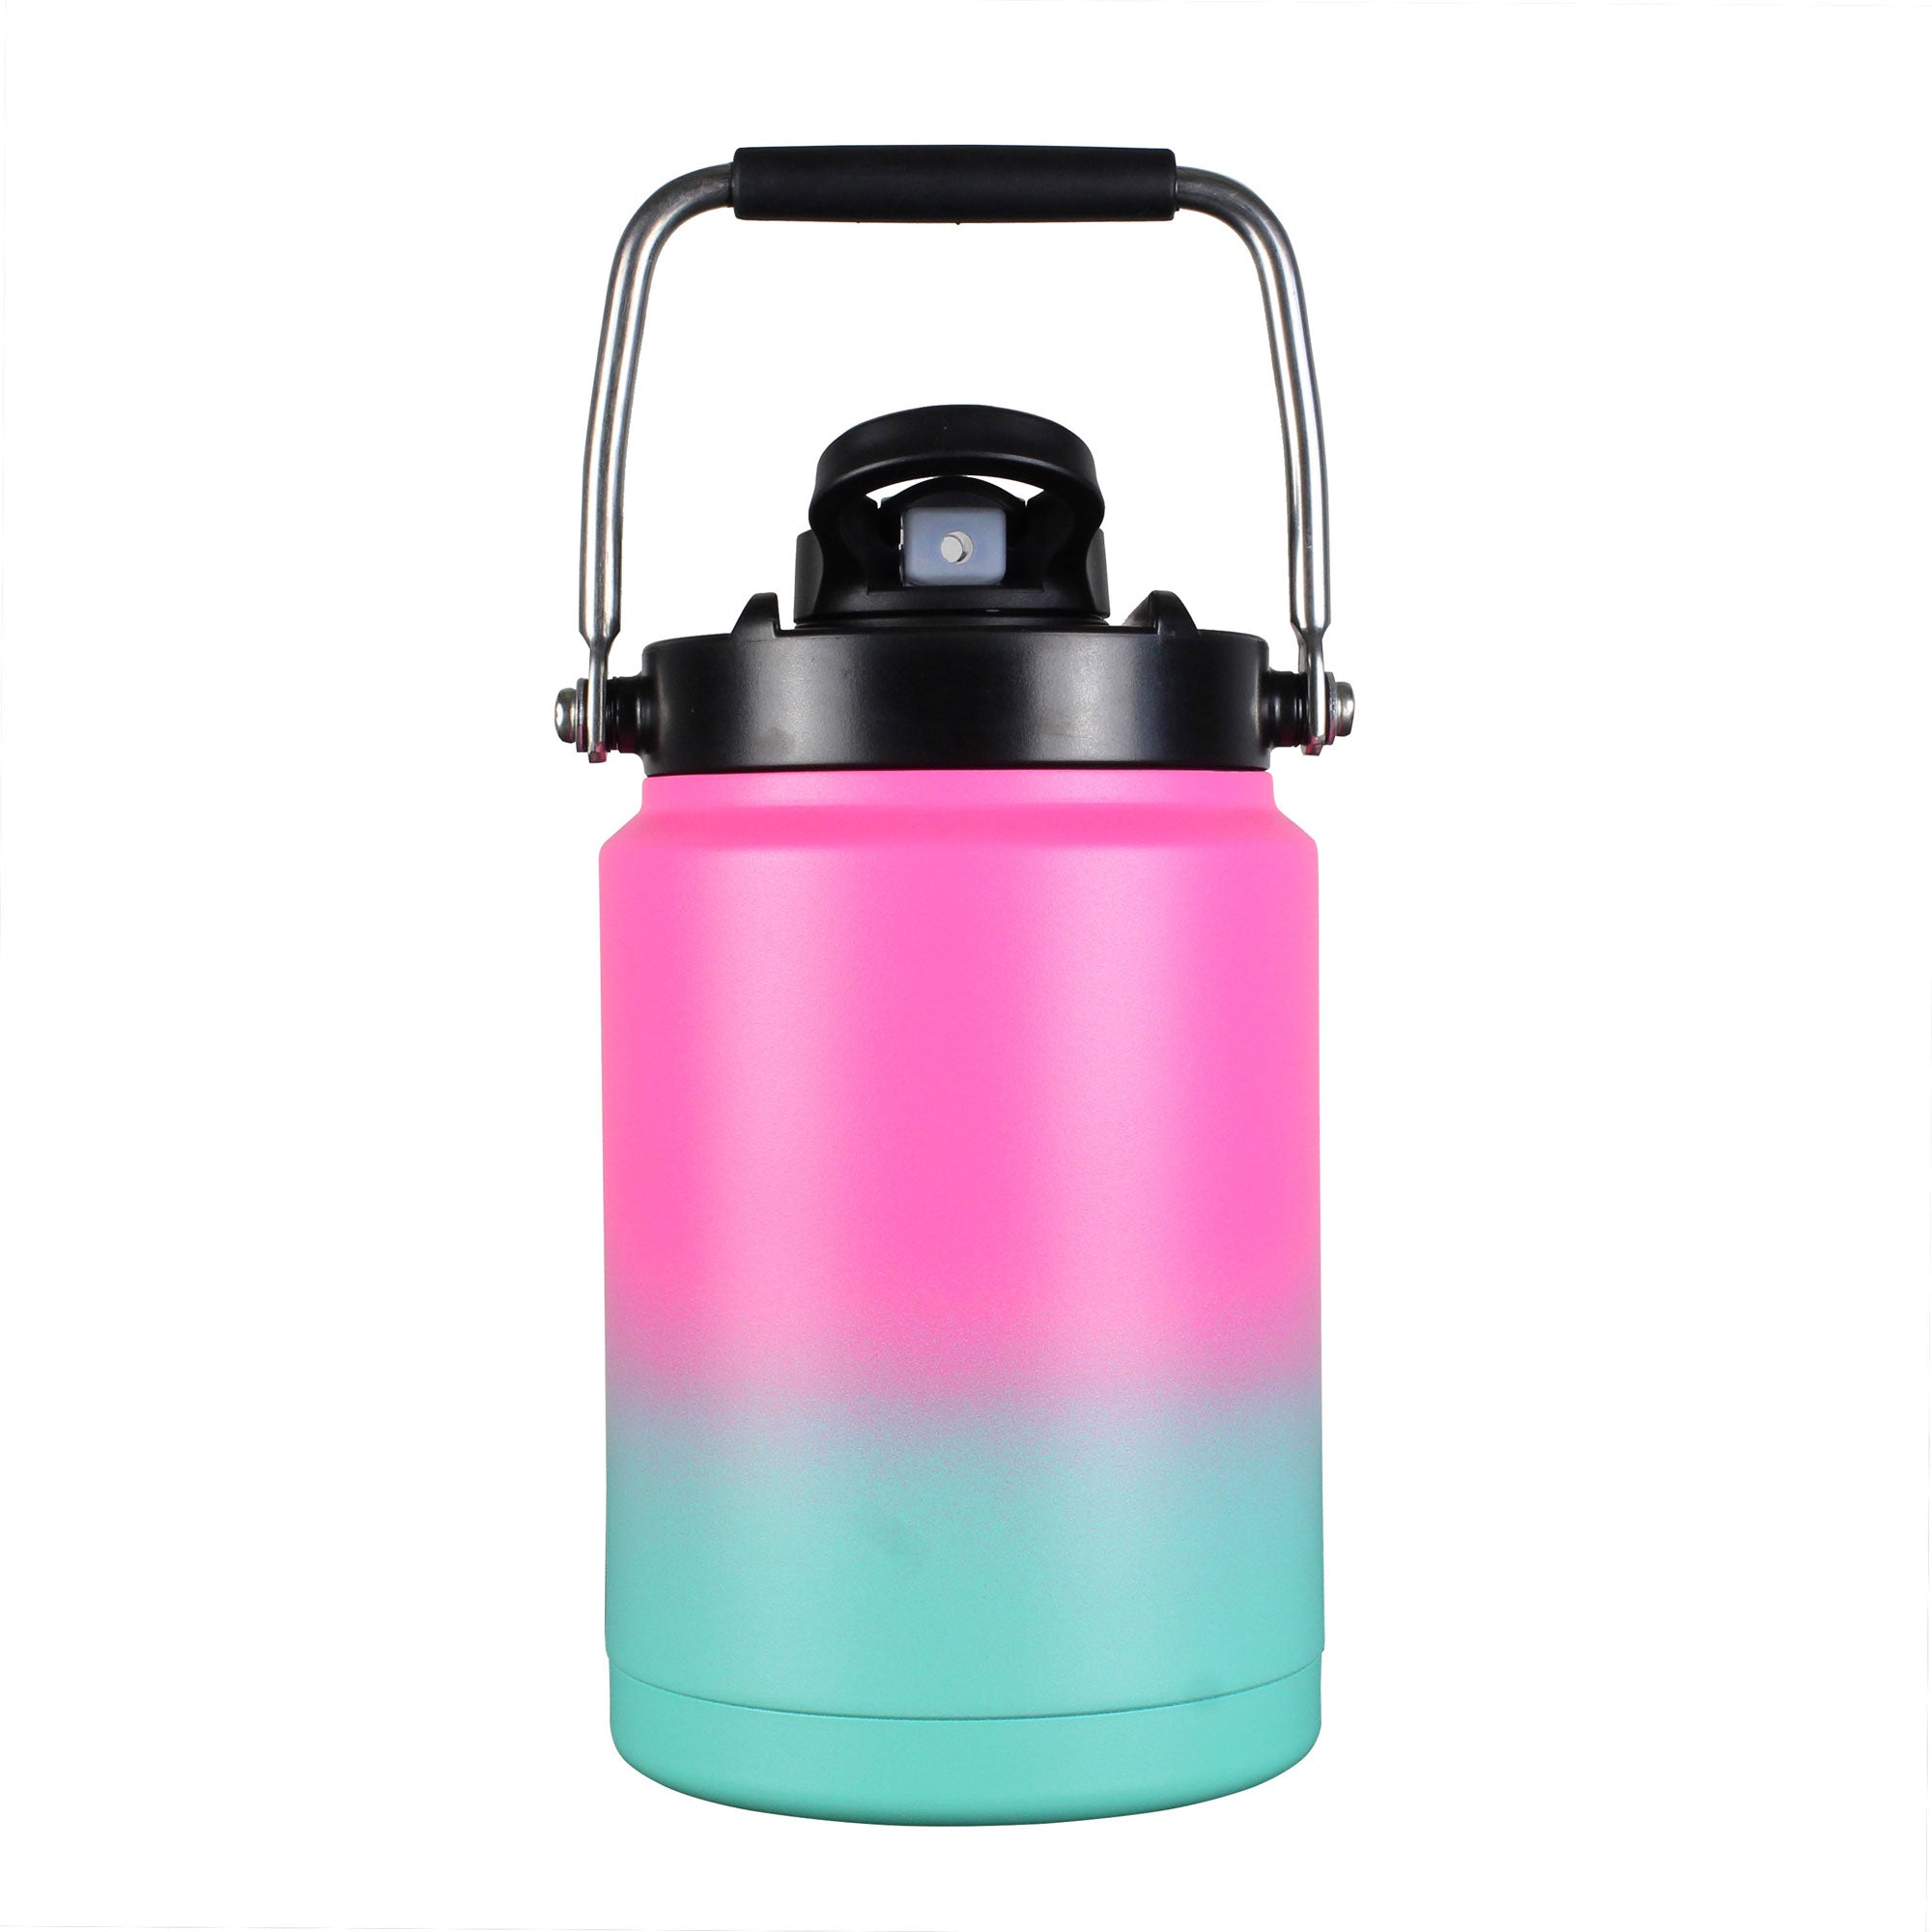 Half Gallon Jug with Metal Base - Mint Pink Ombre